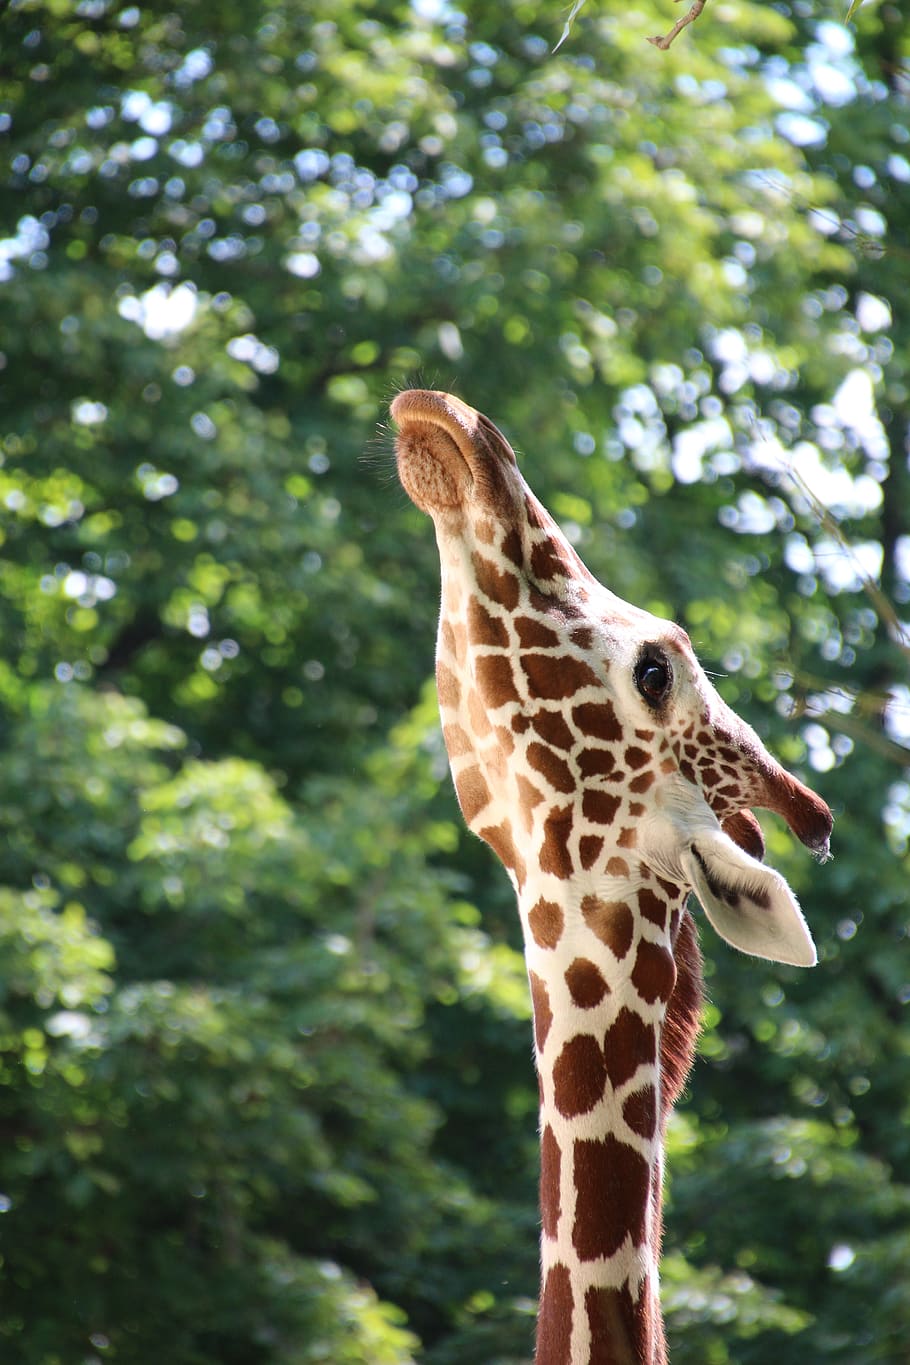 giraffe, face, close up, zoo, background green, stretches neck